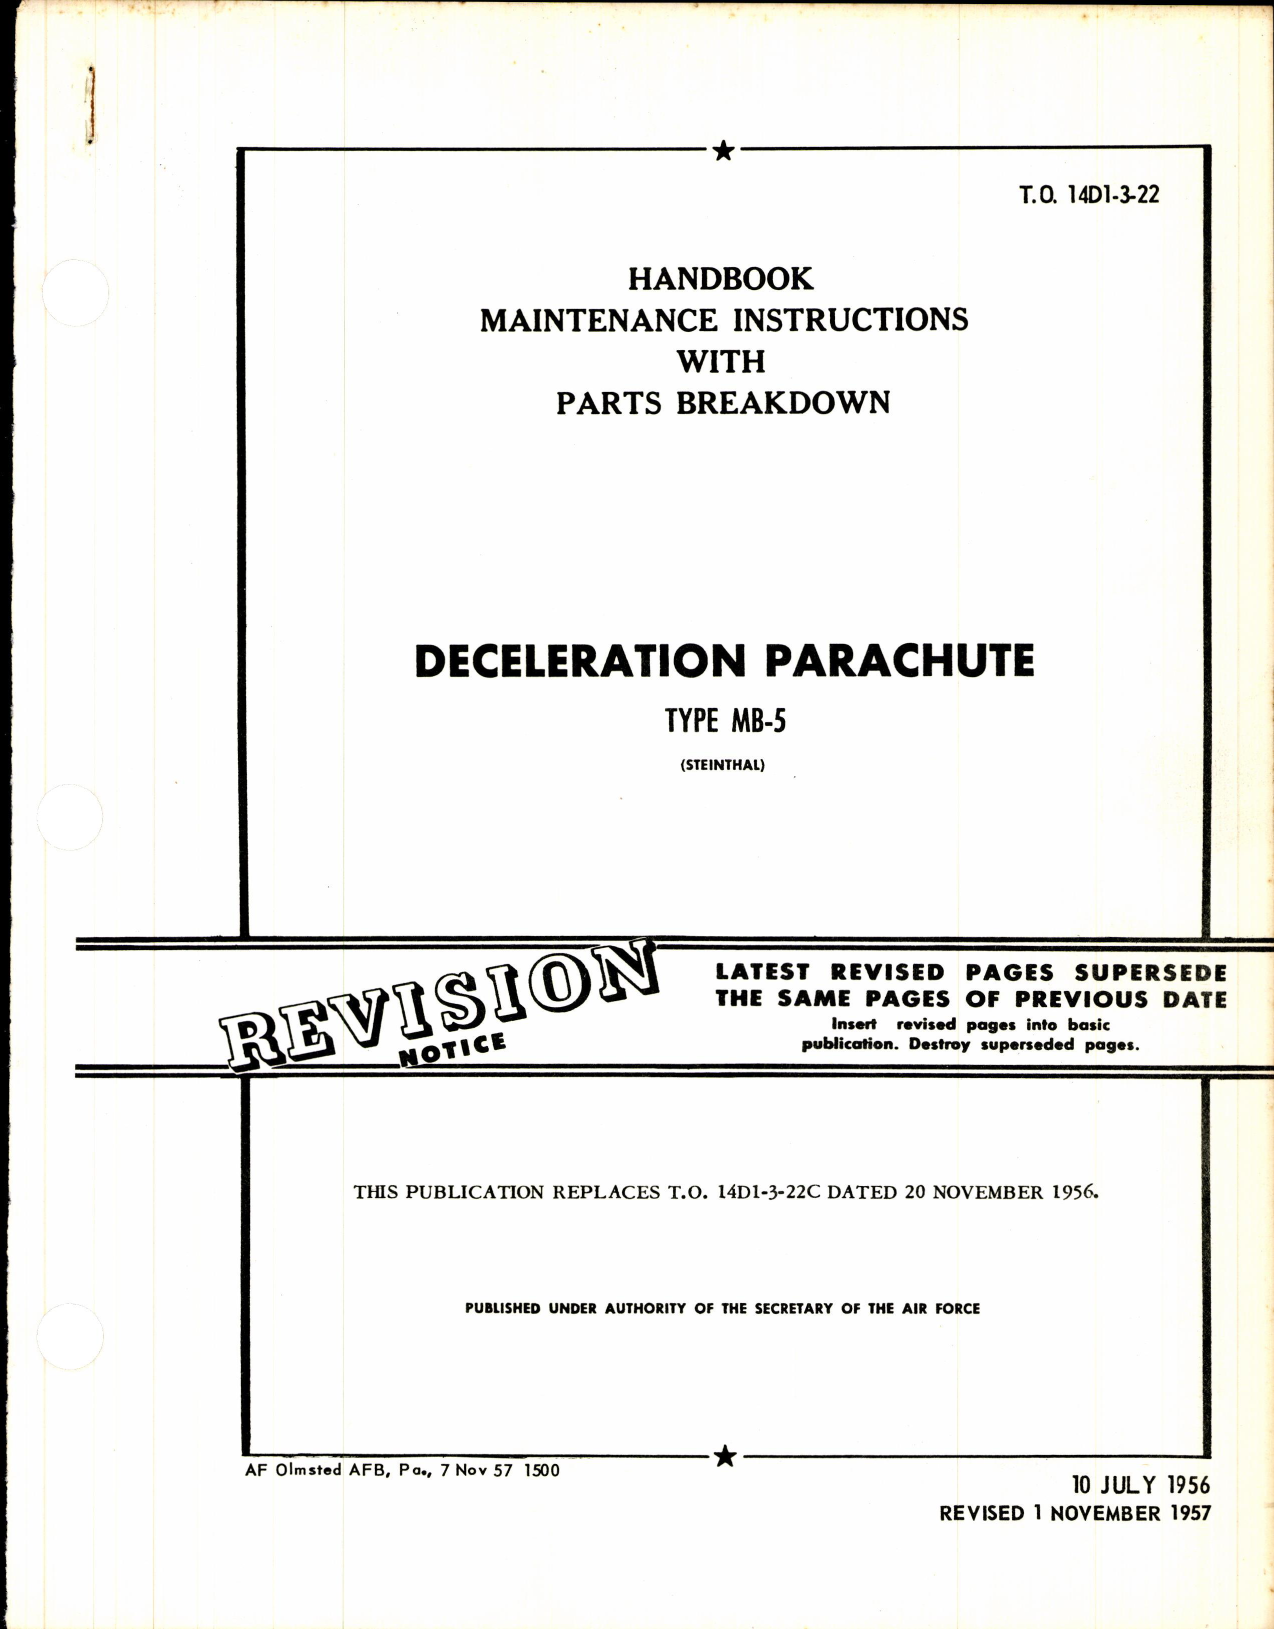 Sample page 1 from AirCorps Library document: Maintenance Instructions with Parts Breakdown for Deceleration Parachute Type MB-5